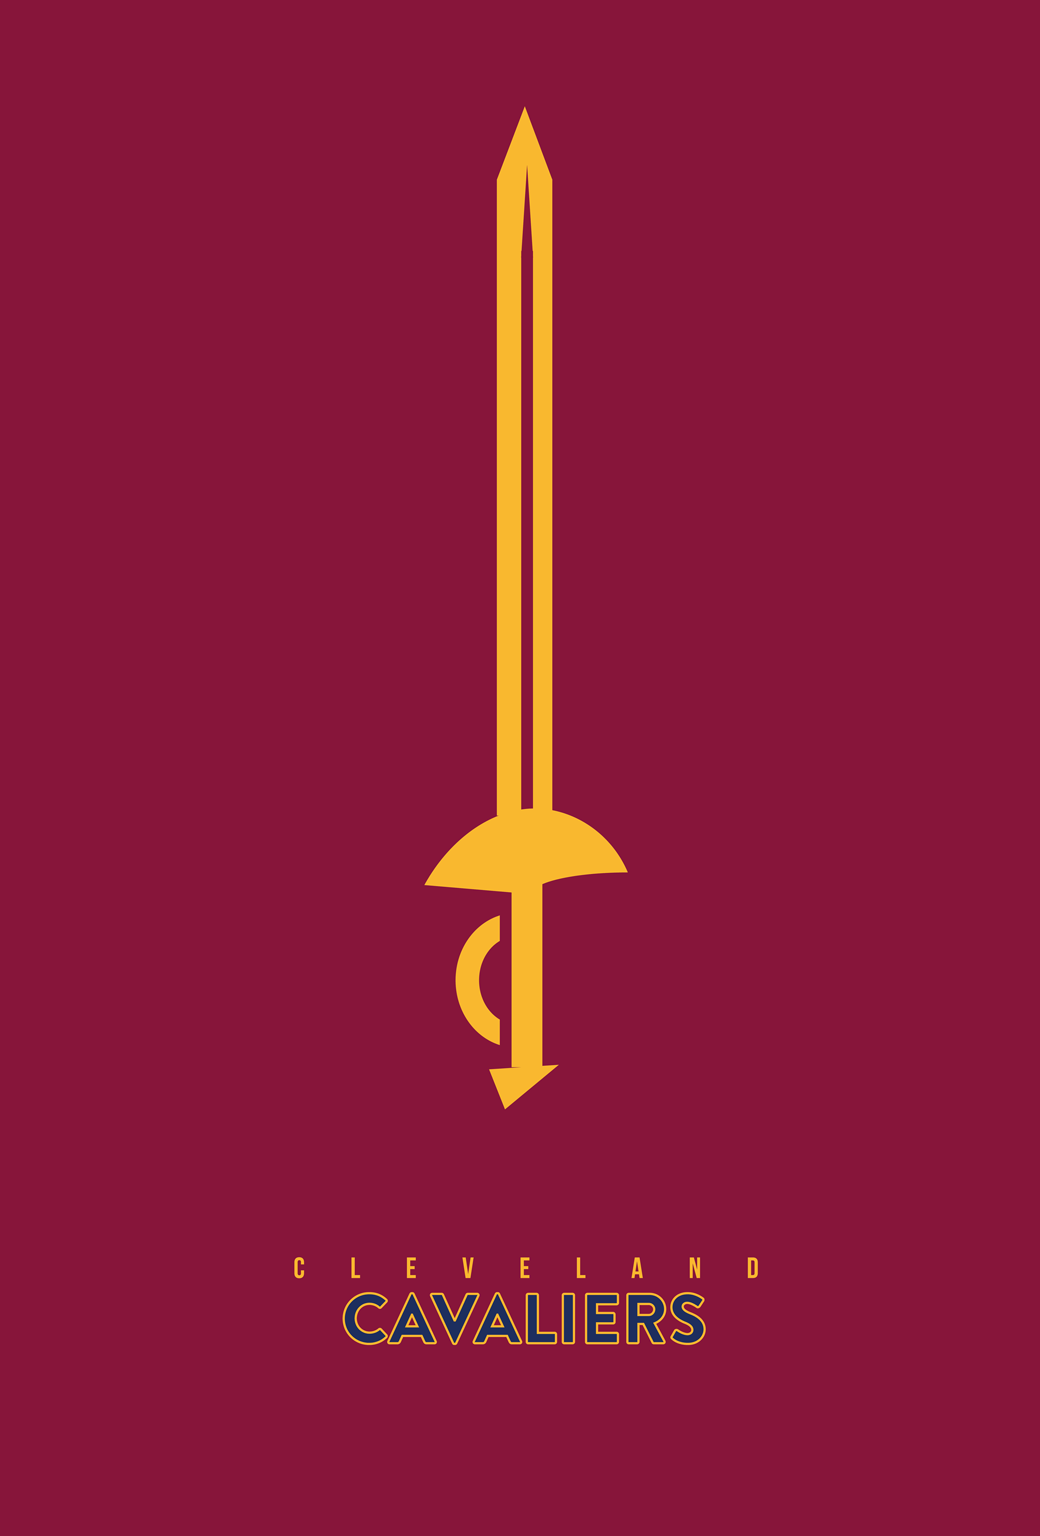 Cleveland Cavaliers Logo Wallpaper, image collections